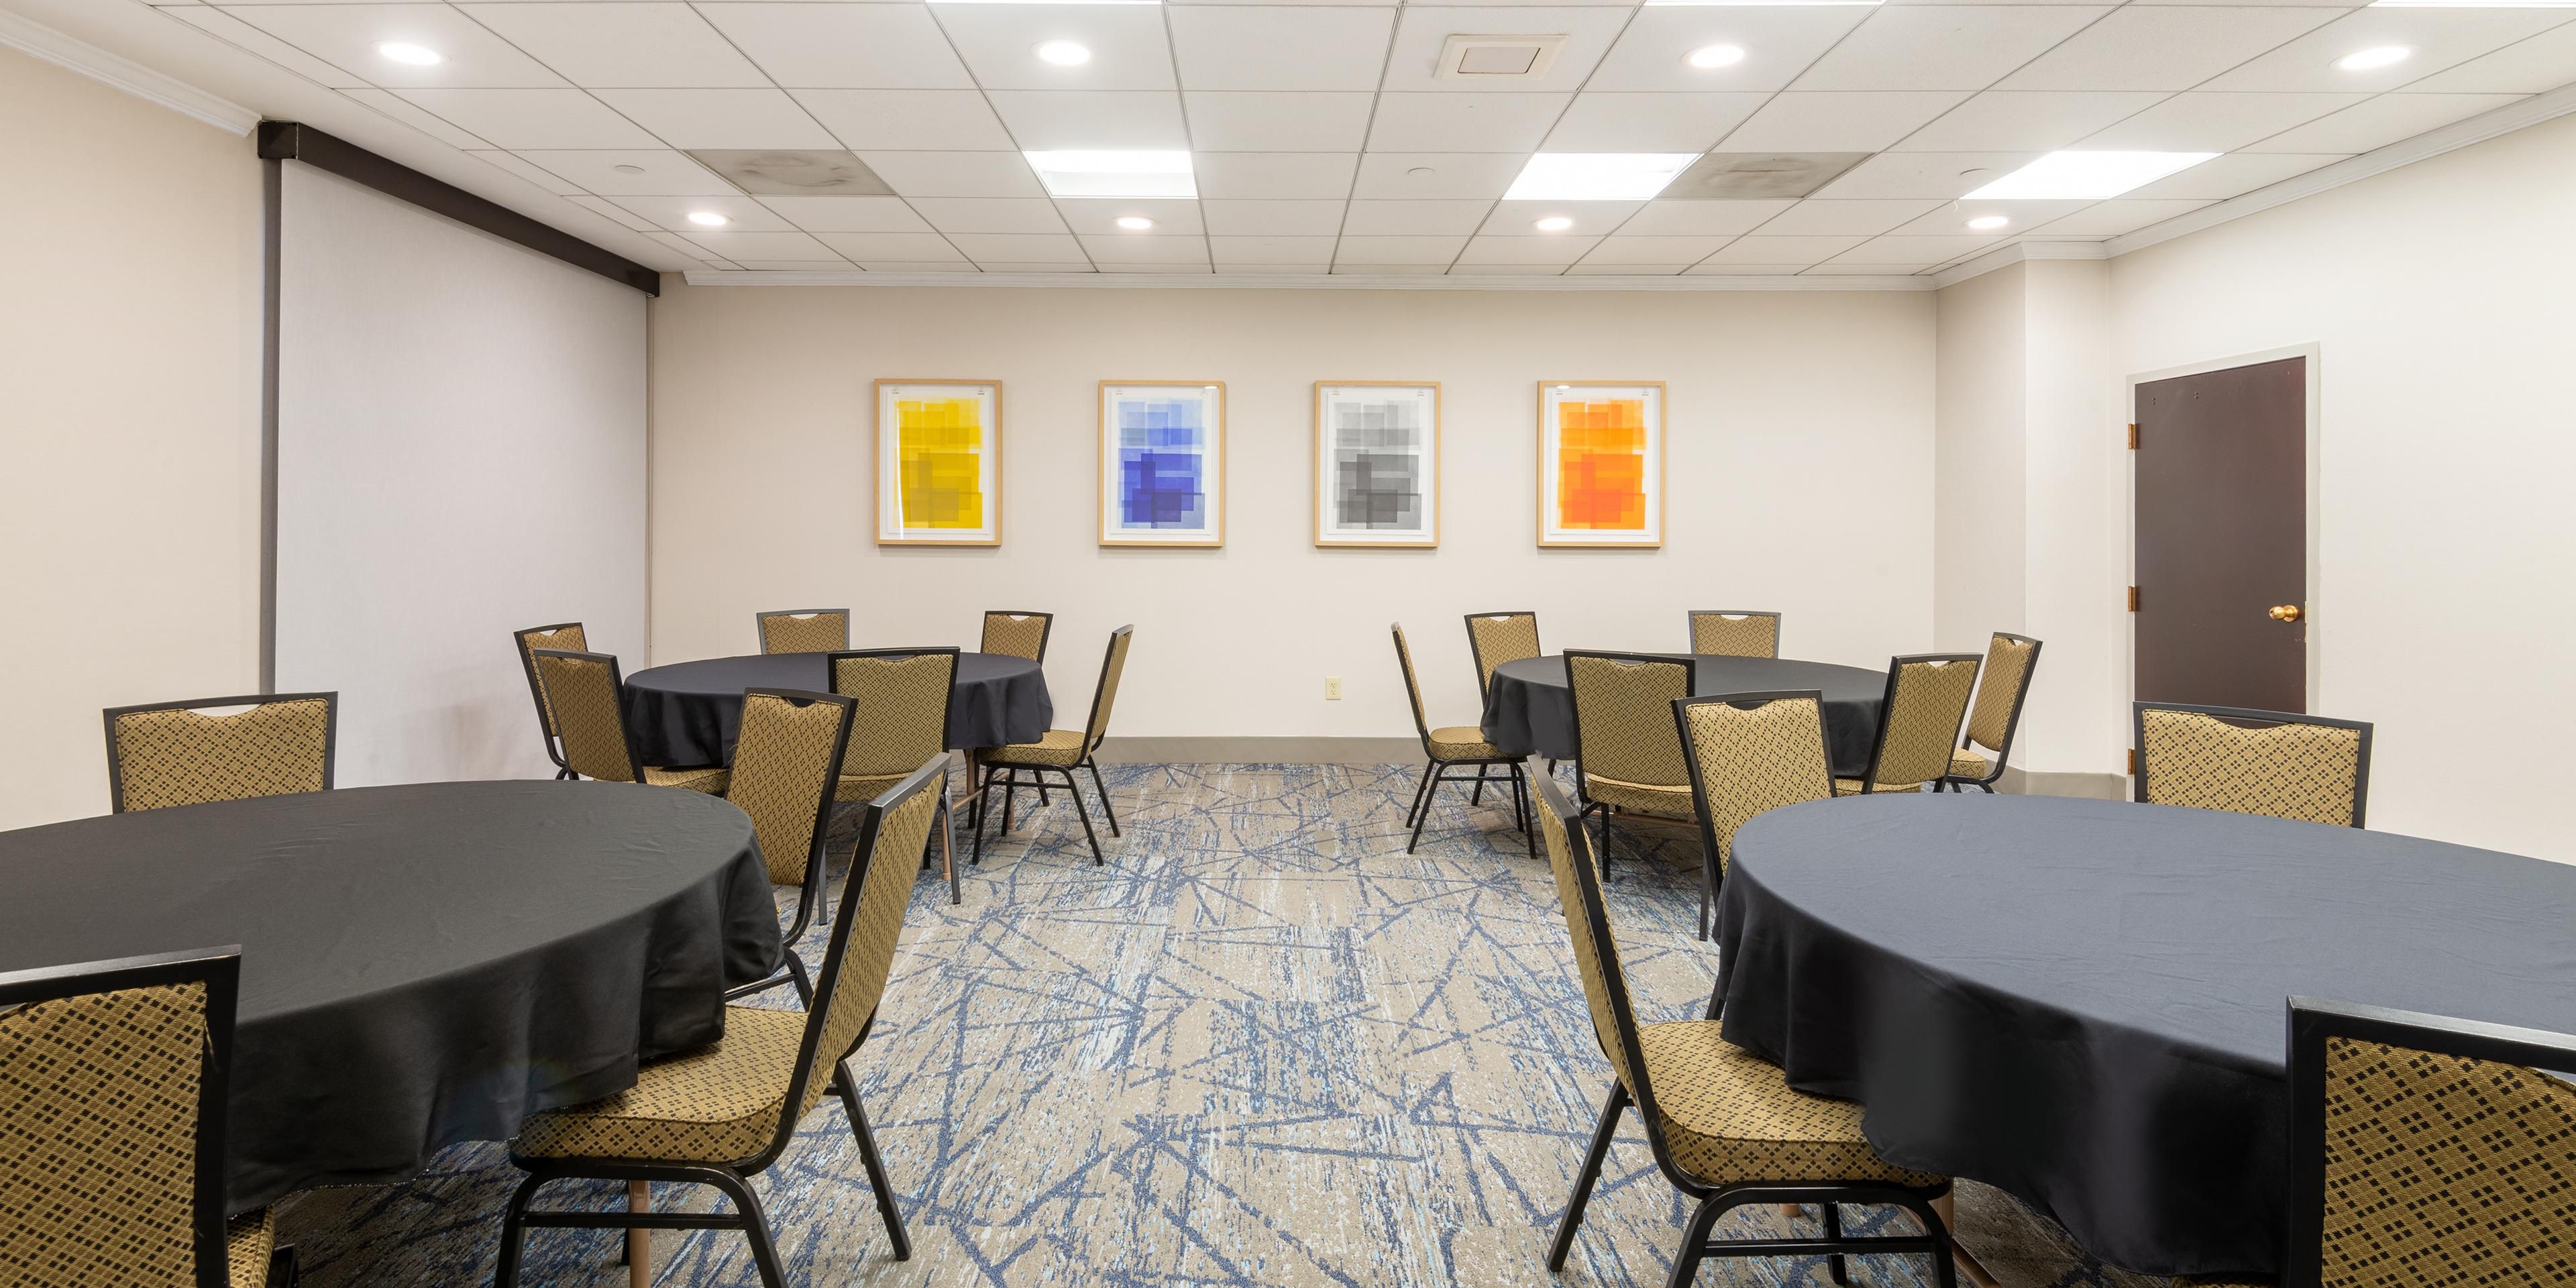 The Franklin Room is available to rent for your next small meeting or social event. Contact the sales department to reserve and organize your event. Have us handle the refreshments or bring in your own. You decide!